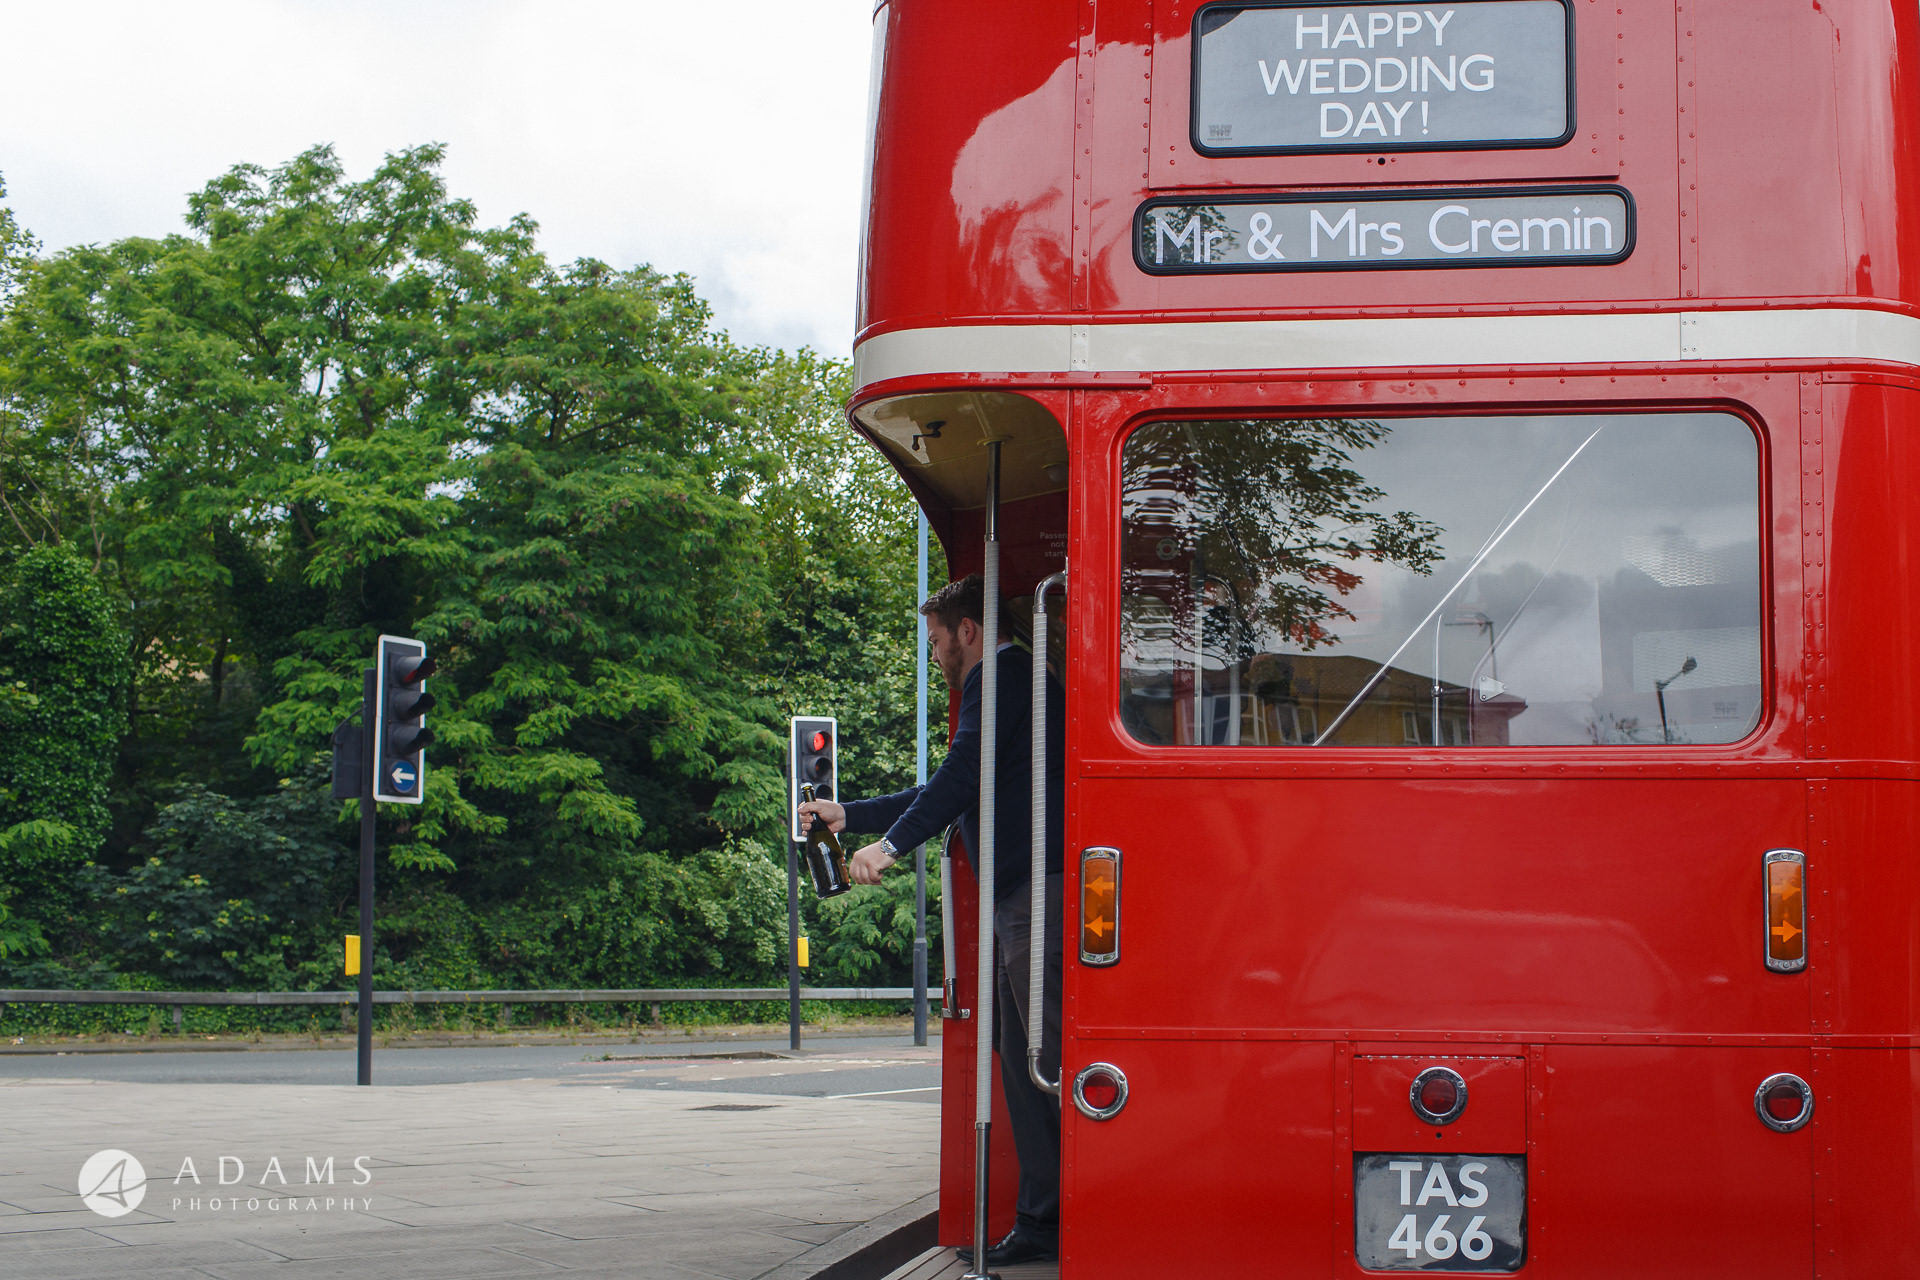 Guess is opening champagne on the bus picture taken by wedding photographer